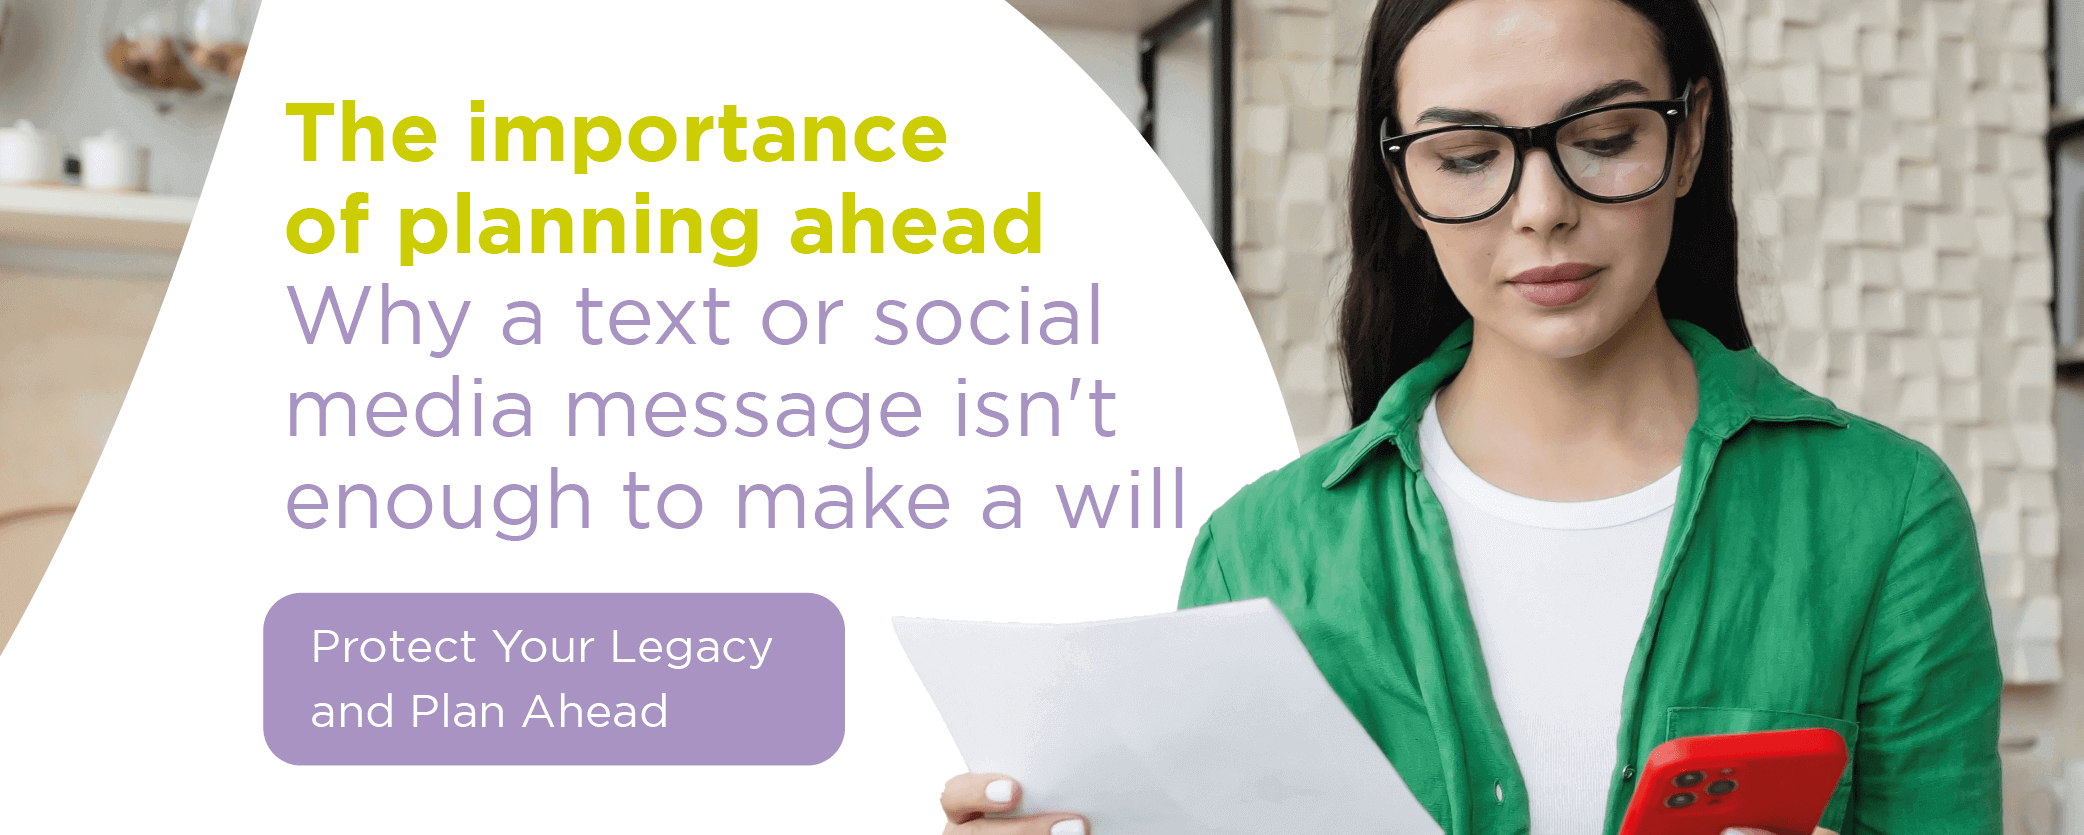 The importance of planning ahead: Why a text or social media message isnt enough to make a will